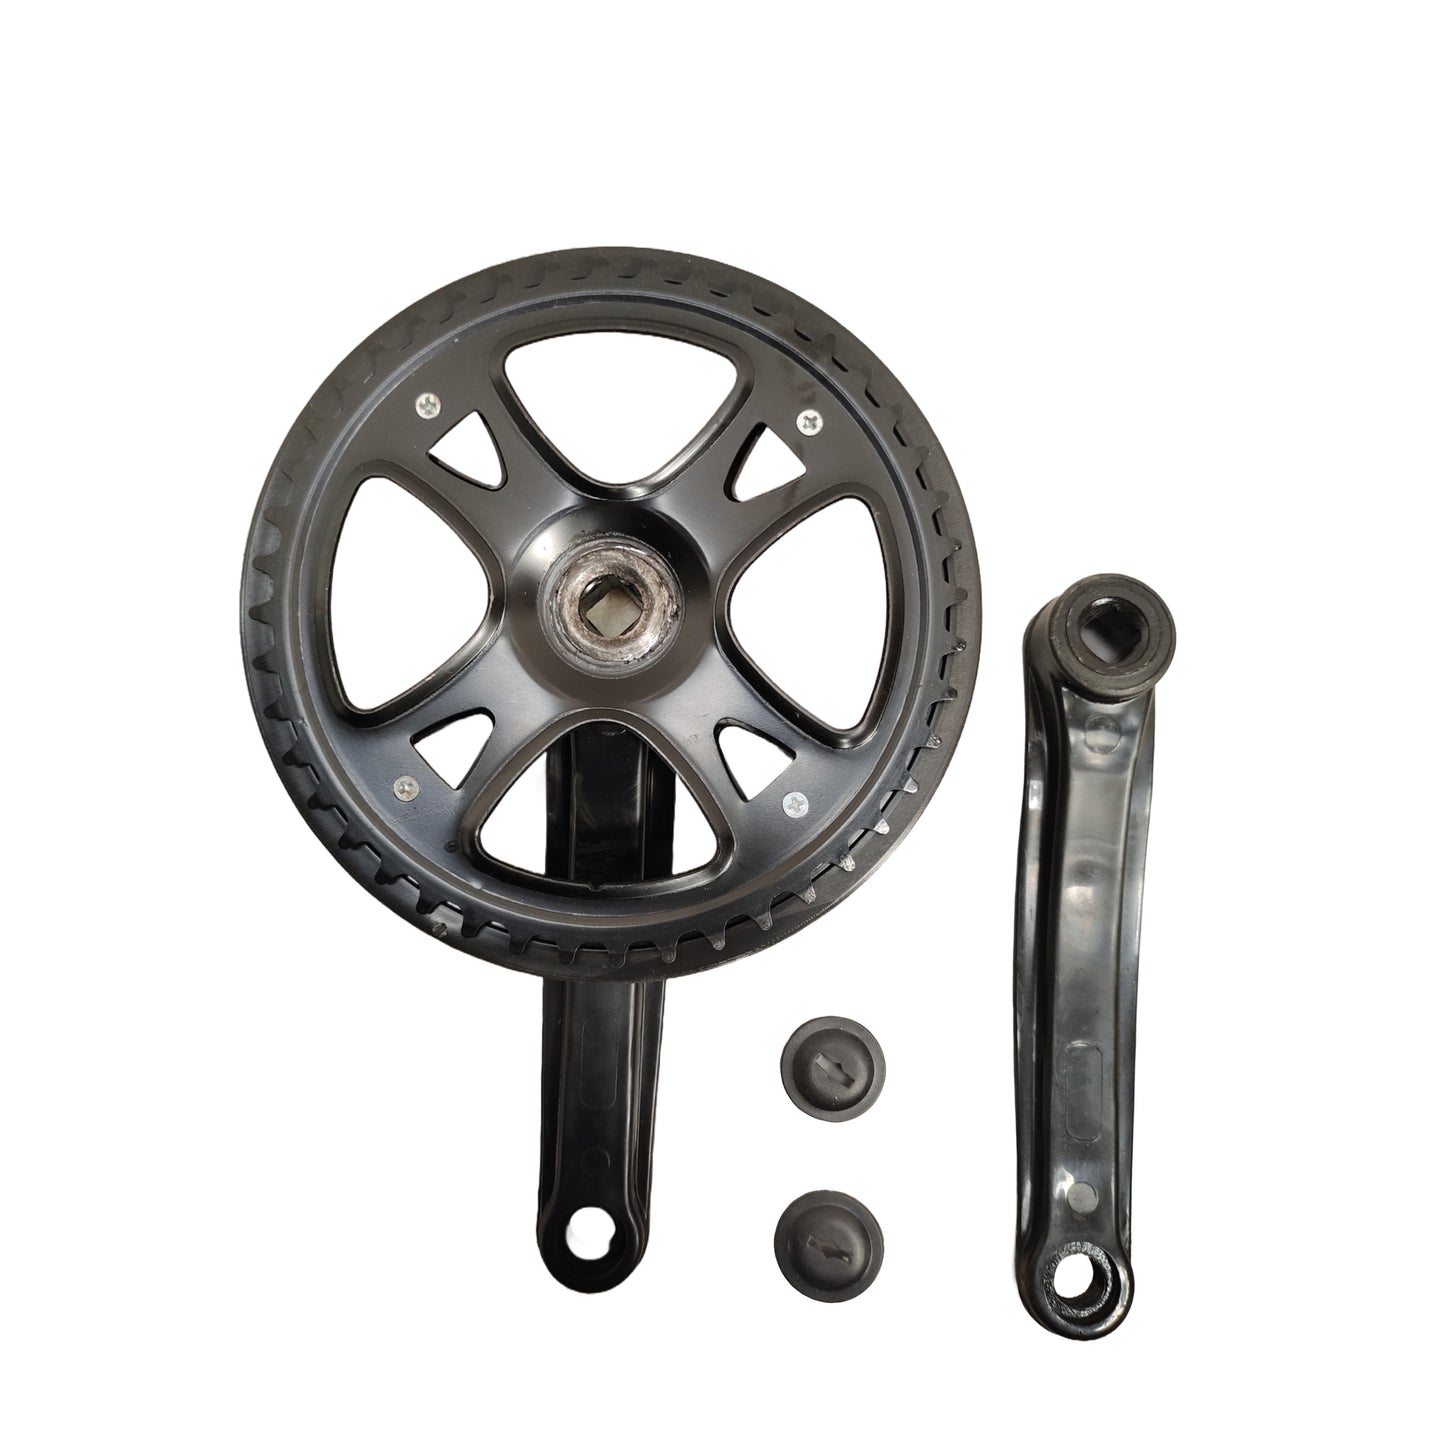 Bicycle crankset single speed steel bottom view spare part by omobikes